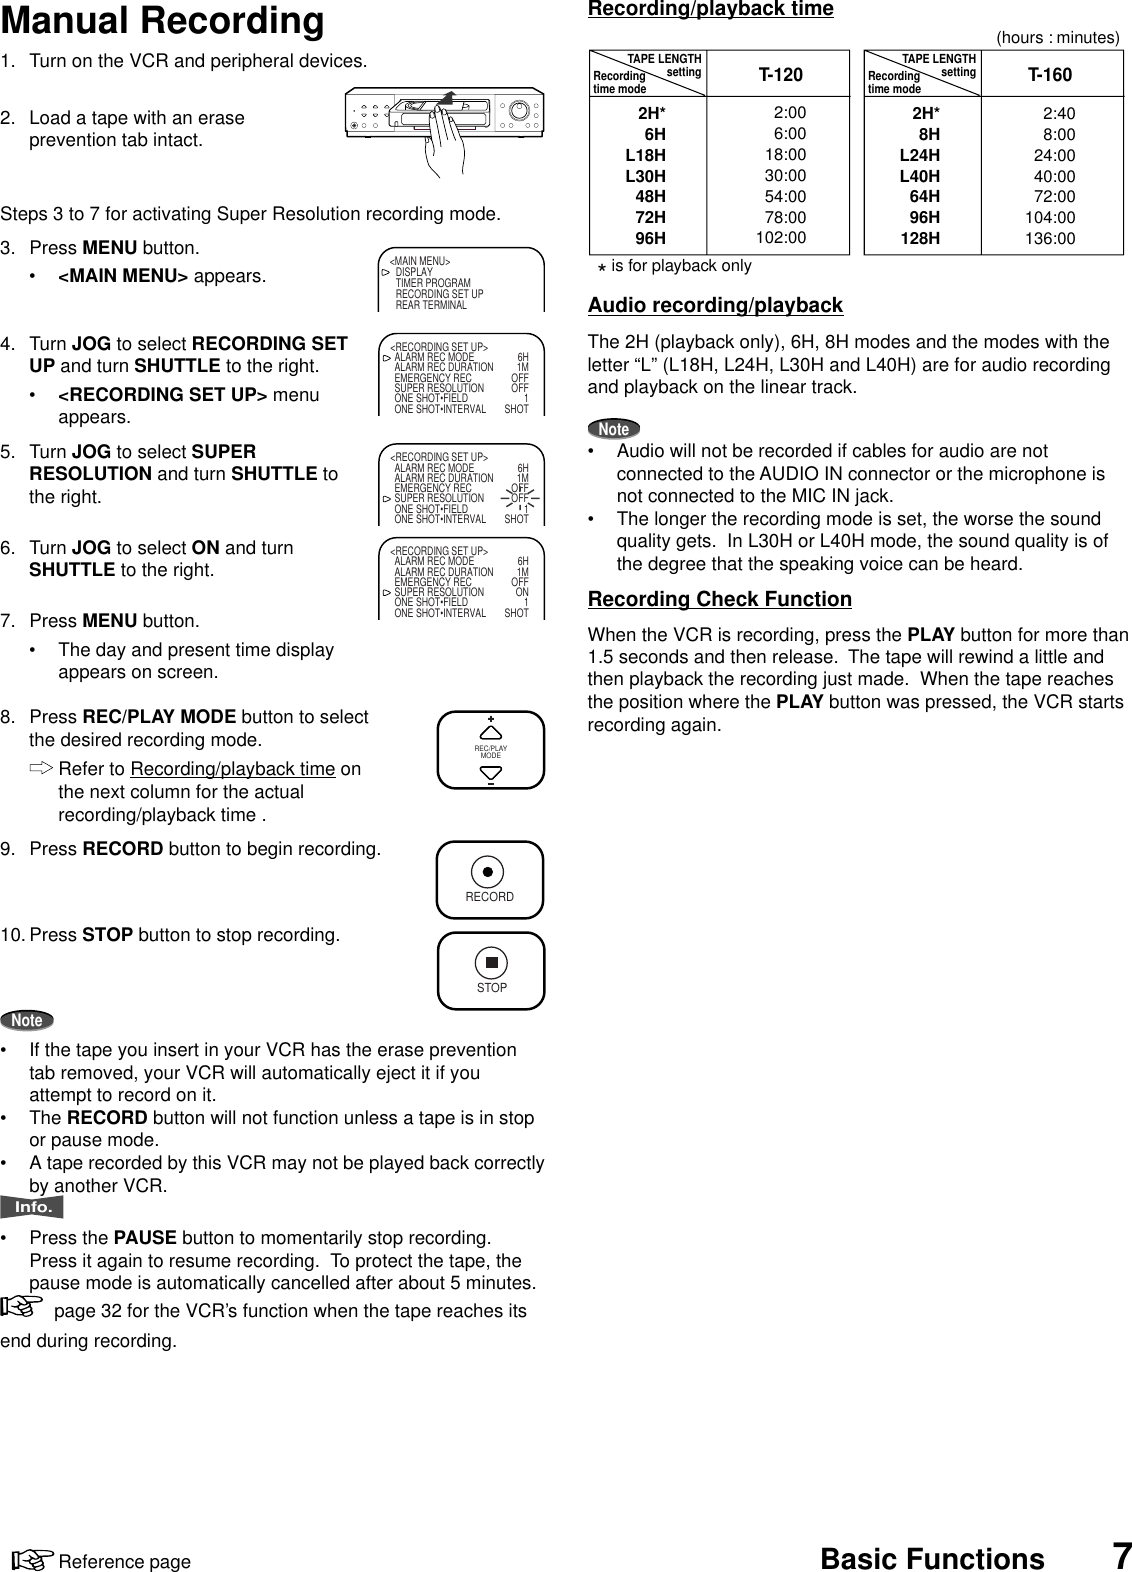 7Reference page Basic Functions1. Turn on the VCR and peripheral devices.2. Load a tape with an eraseprevention tab intact.Steps 3 to 7 for activating Super Resolution recording mode.3. Press MENU button.•&lt;MAIN MENU&gt; appears.4. Turn JOG to select RECORDING SETUP and turn SHUTTLE to the right.•&lt;RECORDING SET UP&gt; menuappears.5. Turn JOG to select SUPERRESOLUTION and turn SHUTTLE tothe right.6. Turn JOG to select ON and turnSHUTTLE to the right.7. Press MENU button.• The day and present time displayappears on screen.8. Press REC/PLAY MODE button to selectthe desired recording mode.Refer to Recording/playback time onthe next column for the actualrecording/playback time .9. Press RECORD button to begin recording.10. Press STOP button to stop recording.Note• If the tape you insert in your VCR has the erase preventiontab removed, your VCR will automatically eject it if youattempt to record on it.• The RECORD button will not function unless a tape is in stopor pause mode.• A tape recorded by this VCR may not be played back correctlyby another VCR.Info.• Press the PAUSE button to momentarily stop recording.Press it again to resume recording.  To protect the tape, thepause mode is automatically cancelled after about 5 minutes.  page 32 for the VCR’s function when the tape reaches itsend during recording.Manual RecordingREC/PLAYMODERECORDSTOP&lt;MAIN MENU&gt;DISPLAYTIMER PROGRAMRECORDING SET UPREAR TERMINAL&lt;RECORDING SET UP&gt;ALARM REC MODE 6HALARM REC DURATION 1MEMERGENCY REC OFFSUPER RESOLUTION OFFONE SHOT•FIELD 1ONE SHOT•INTERVAL SHOT&lt;RECORDING SET UP&gt;ALARM REC MODE 6HALARM REC DURATION 1MEMERGENCY REC OFFSUPER RESOLUTION OFFONE SHOT•FIELD 1ONE SHOT•INTERVAL SHOT&lt;RECORDING SET UP&gt;ALARM REC MODE 6HALARM REC DURATION 1MEMERGENCY REC OFFSUPER RESOLUTION ONONE SHOT•FIELD 1ONE SHOT•INTERVAL SHOTRecording/playback timeAudio recording/playbackThe 2H (playback only), 6H, 8H modes and the modes with theletter “L” (L18H, L24H, L30H and L40H) are for audio recordingand playback on the linear track.Note• Audio will not be recorded if cables for audio are notconnected to the AUDIO IN connector or the microphone isnot connected to the MIC IN jack.• The longer the recording mode is set, the worse the soundquality gets.  In L30H or L40H mode, the sound quality is ofthe degree that the speaking voice can be heard.Recording Check FunctionWhen the VCR is recording, press the PLAY button for more than1.5 seconds and then release.  The tape will rewind a little andthen playback the recording just made.  When the tape reachesthe position where the PLAY button was pressed, the VCR startsrecording again.* is for playback onlyT-120 T-160TAPE LENGTHsetting2H*6HL18HL30H48H72H96H2:006:0018:0030:0054:0078:00102:002:408:0024:0040:0072:00104:00136:002H*8HL24HL40H64H96H128HRecordingtime modeTAPE LENGTHsettingRecordingtime mode(hours : minutes)